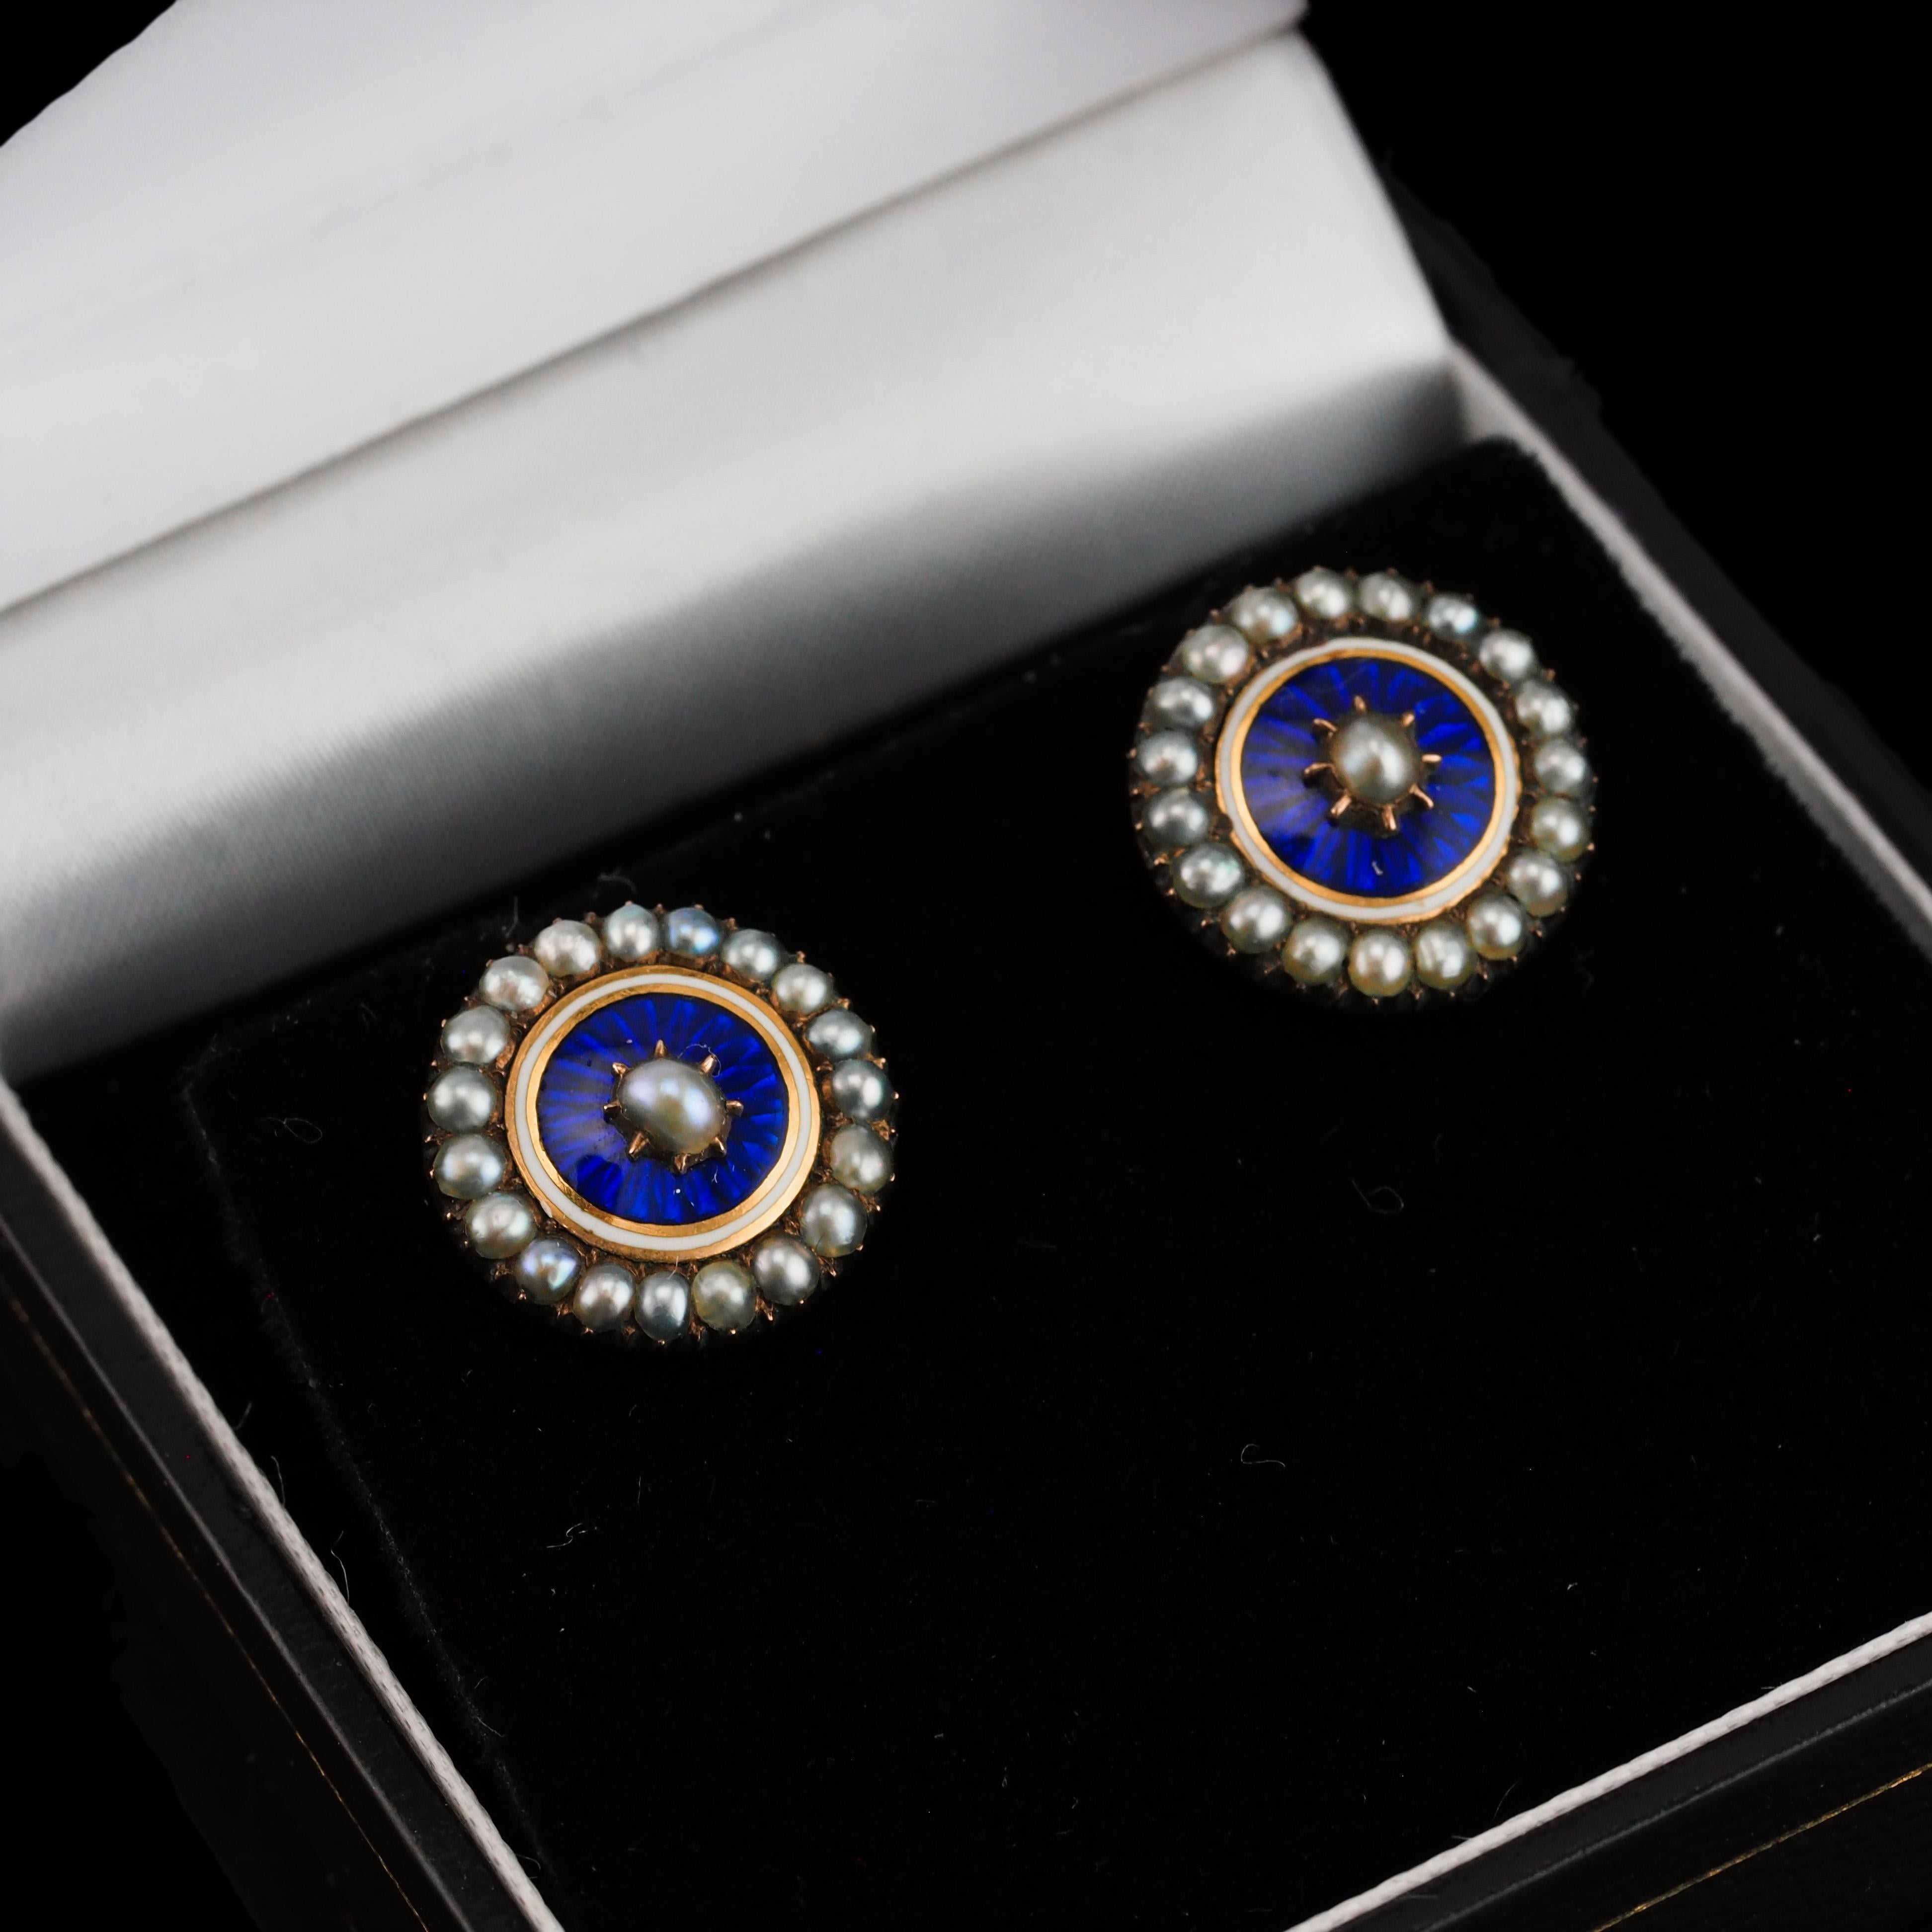 Antique Georgian Gold Earrings with Blue Enamel Guilloche Pearl Cluster c.1800 For Sale 8